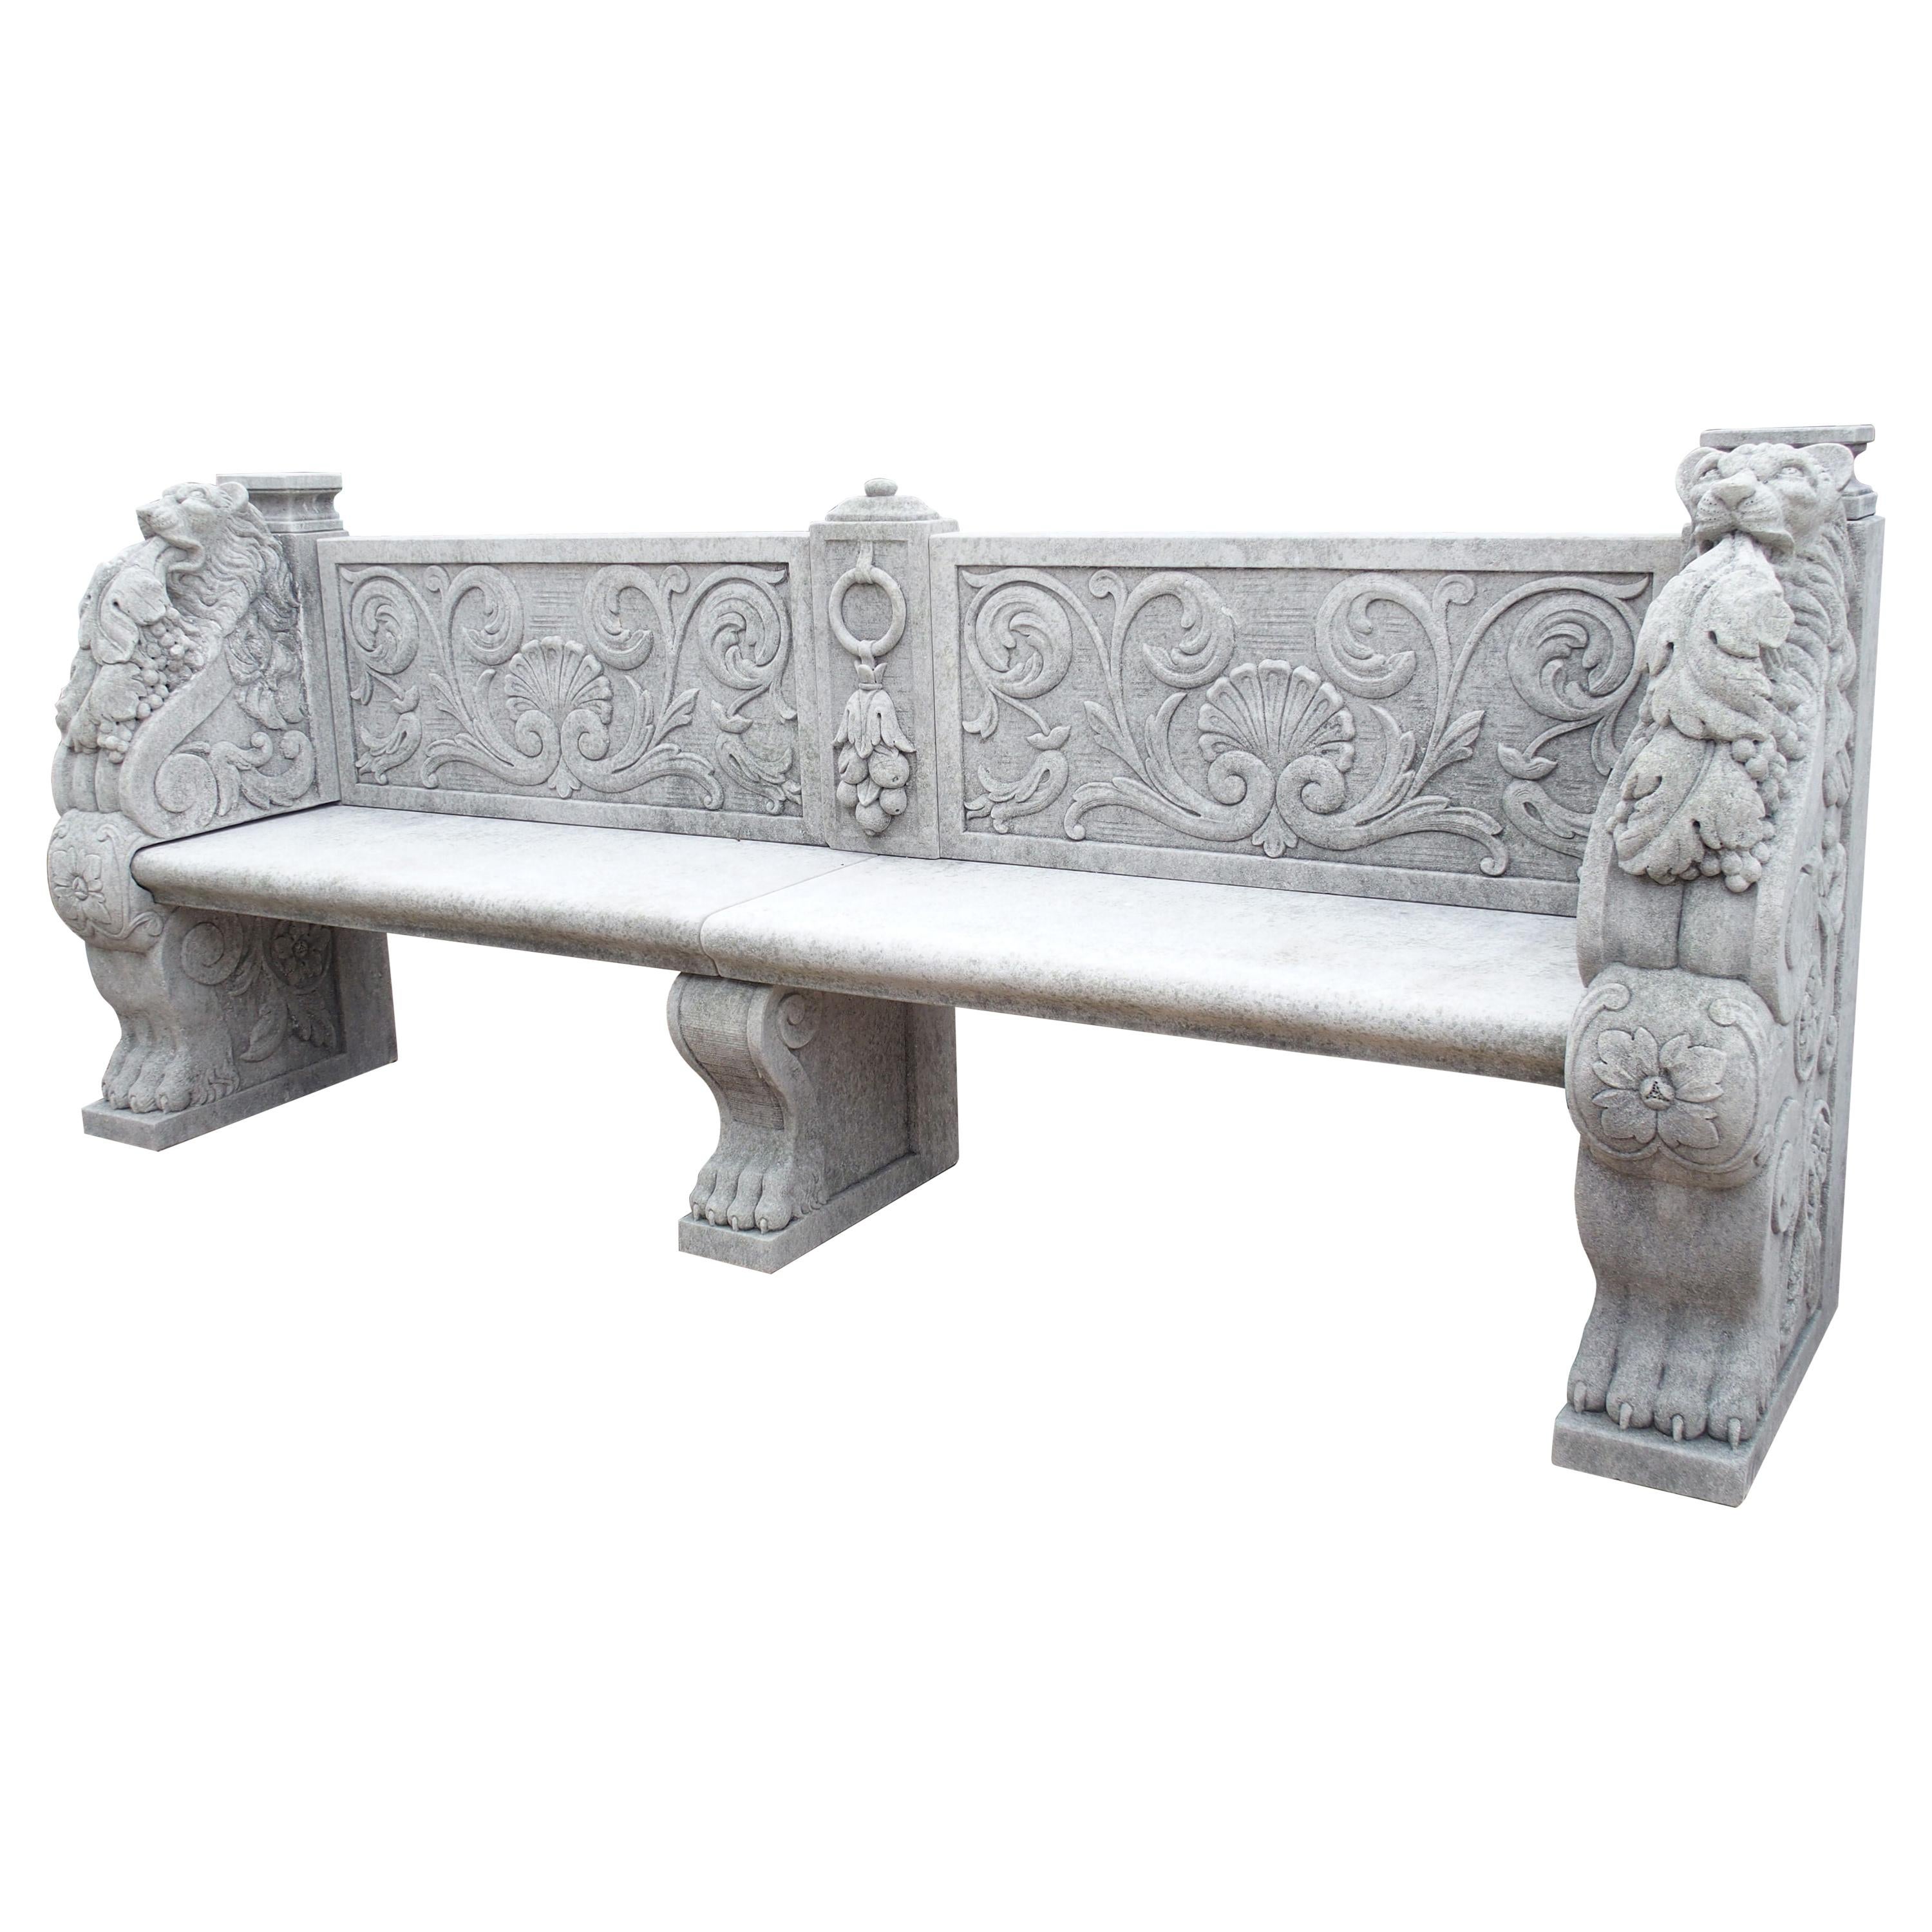 Two Large and Well-Carved Italian Limestone Garden Benches